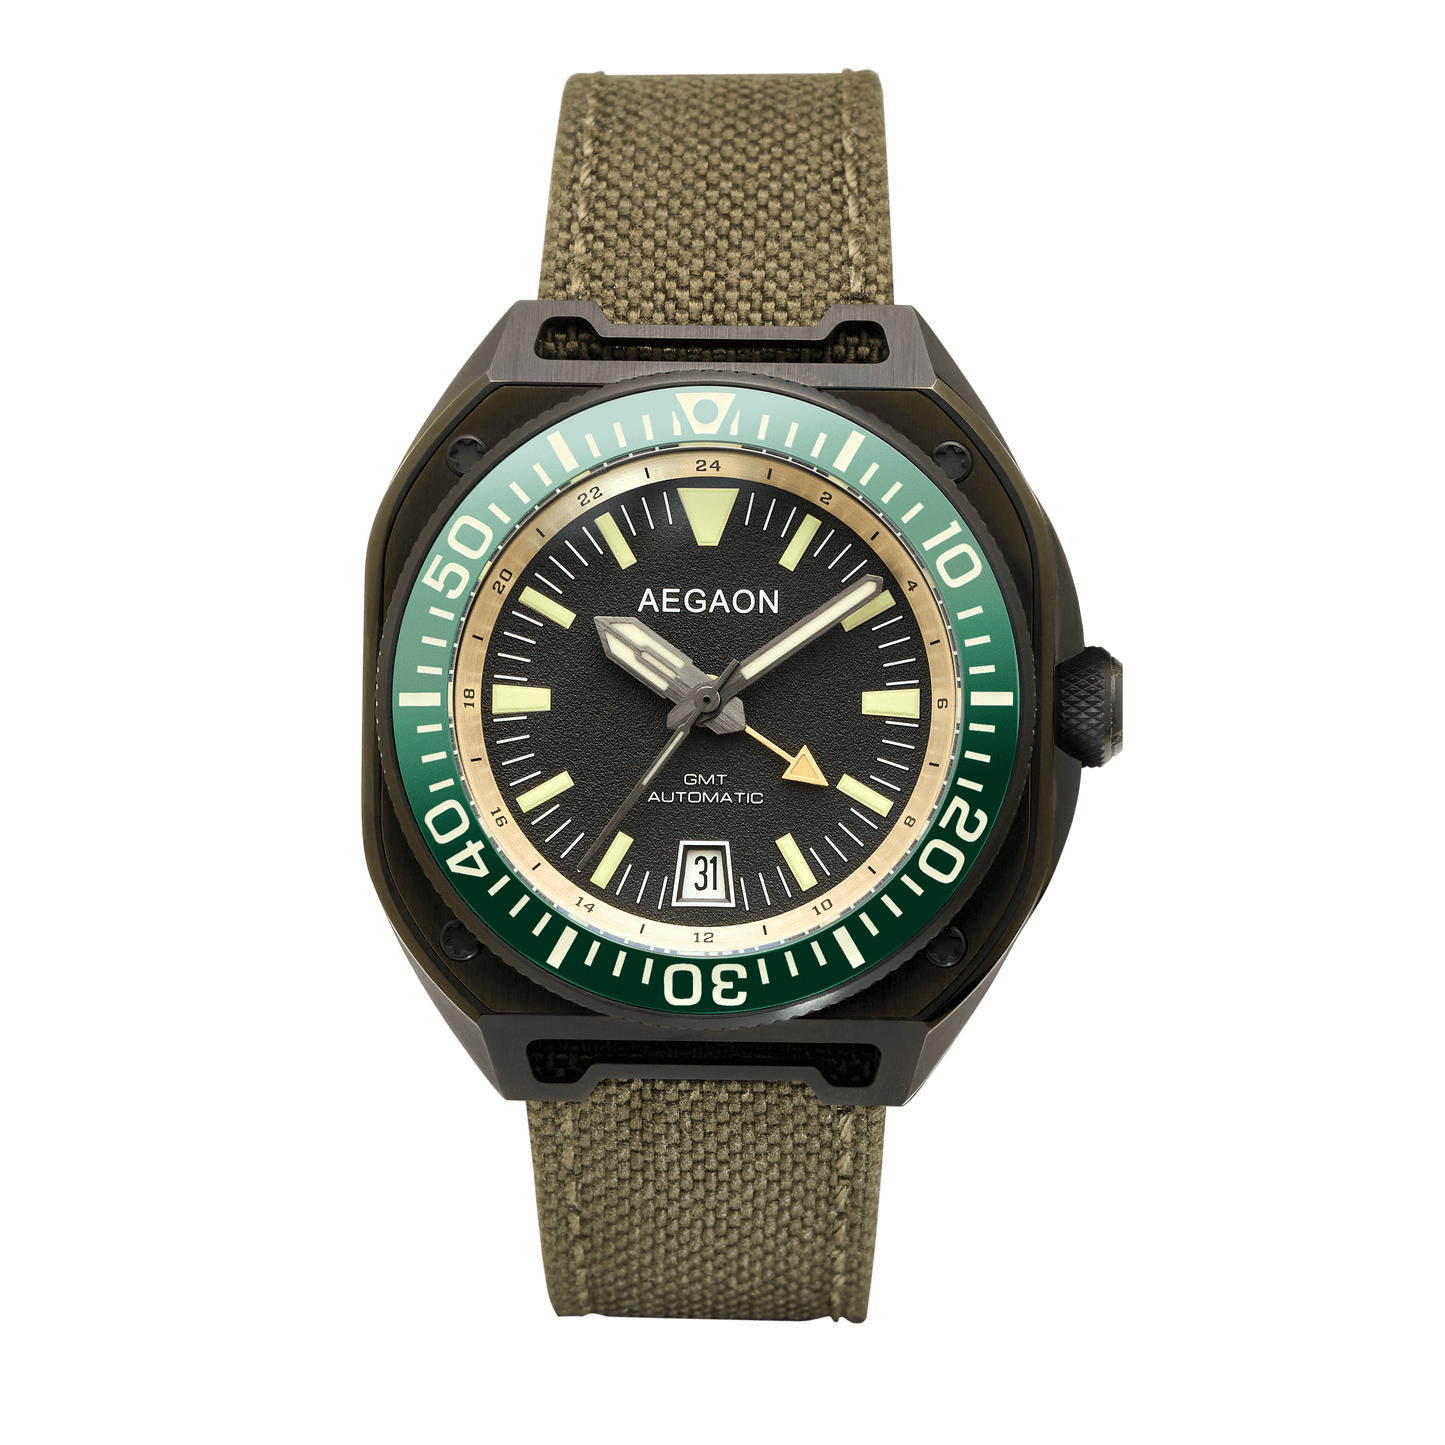 "TEMPTATION III" GMT Automatic Dive Watch (Green)